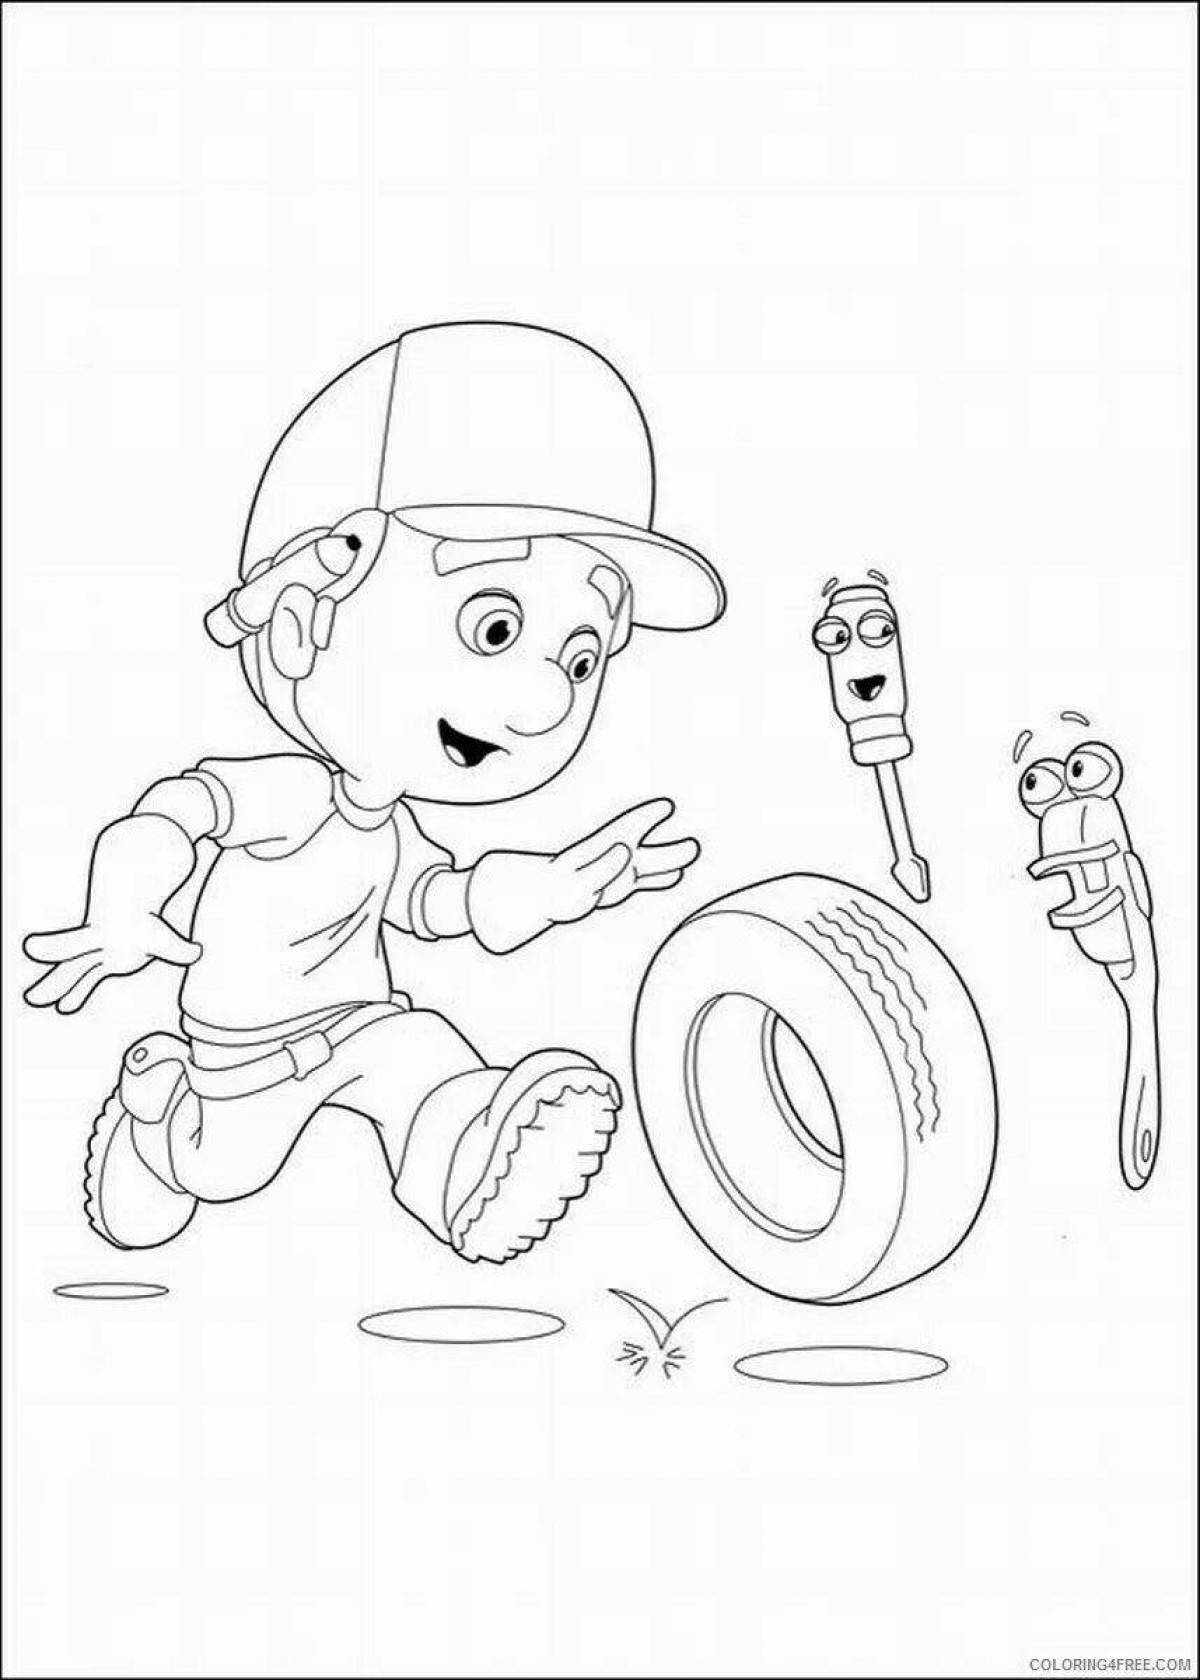 Intriguing cog coloring page